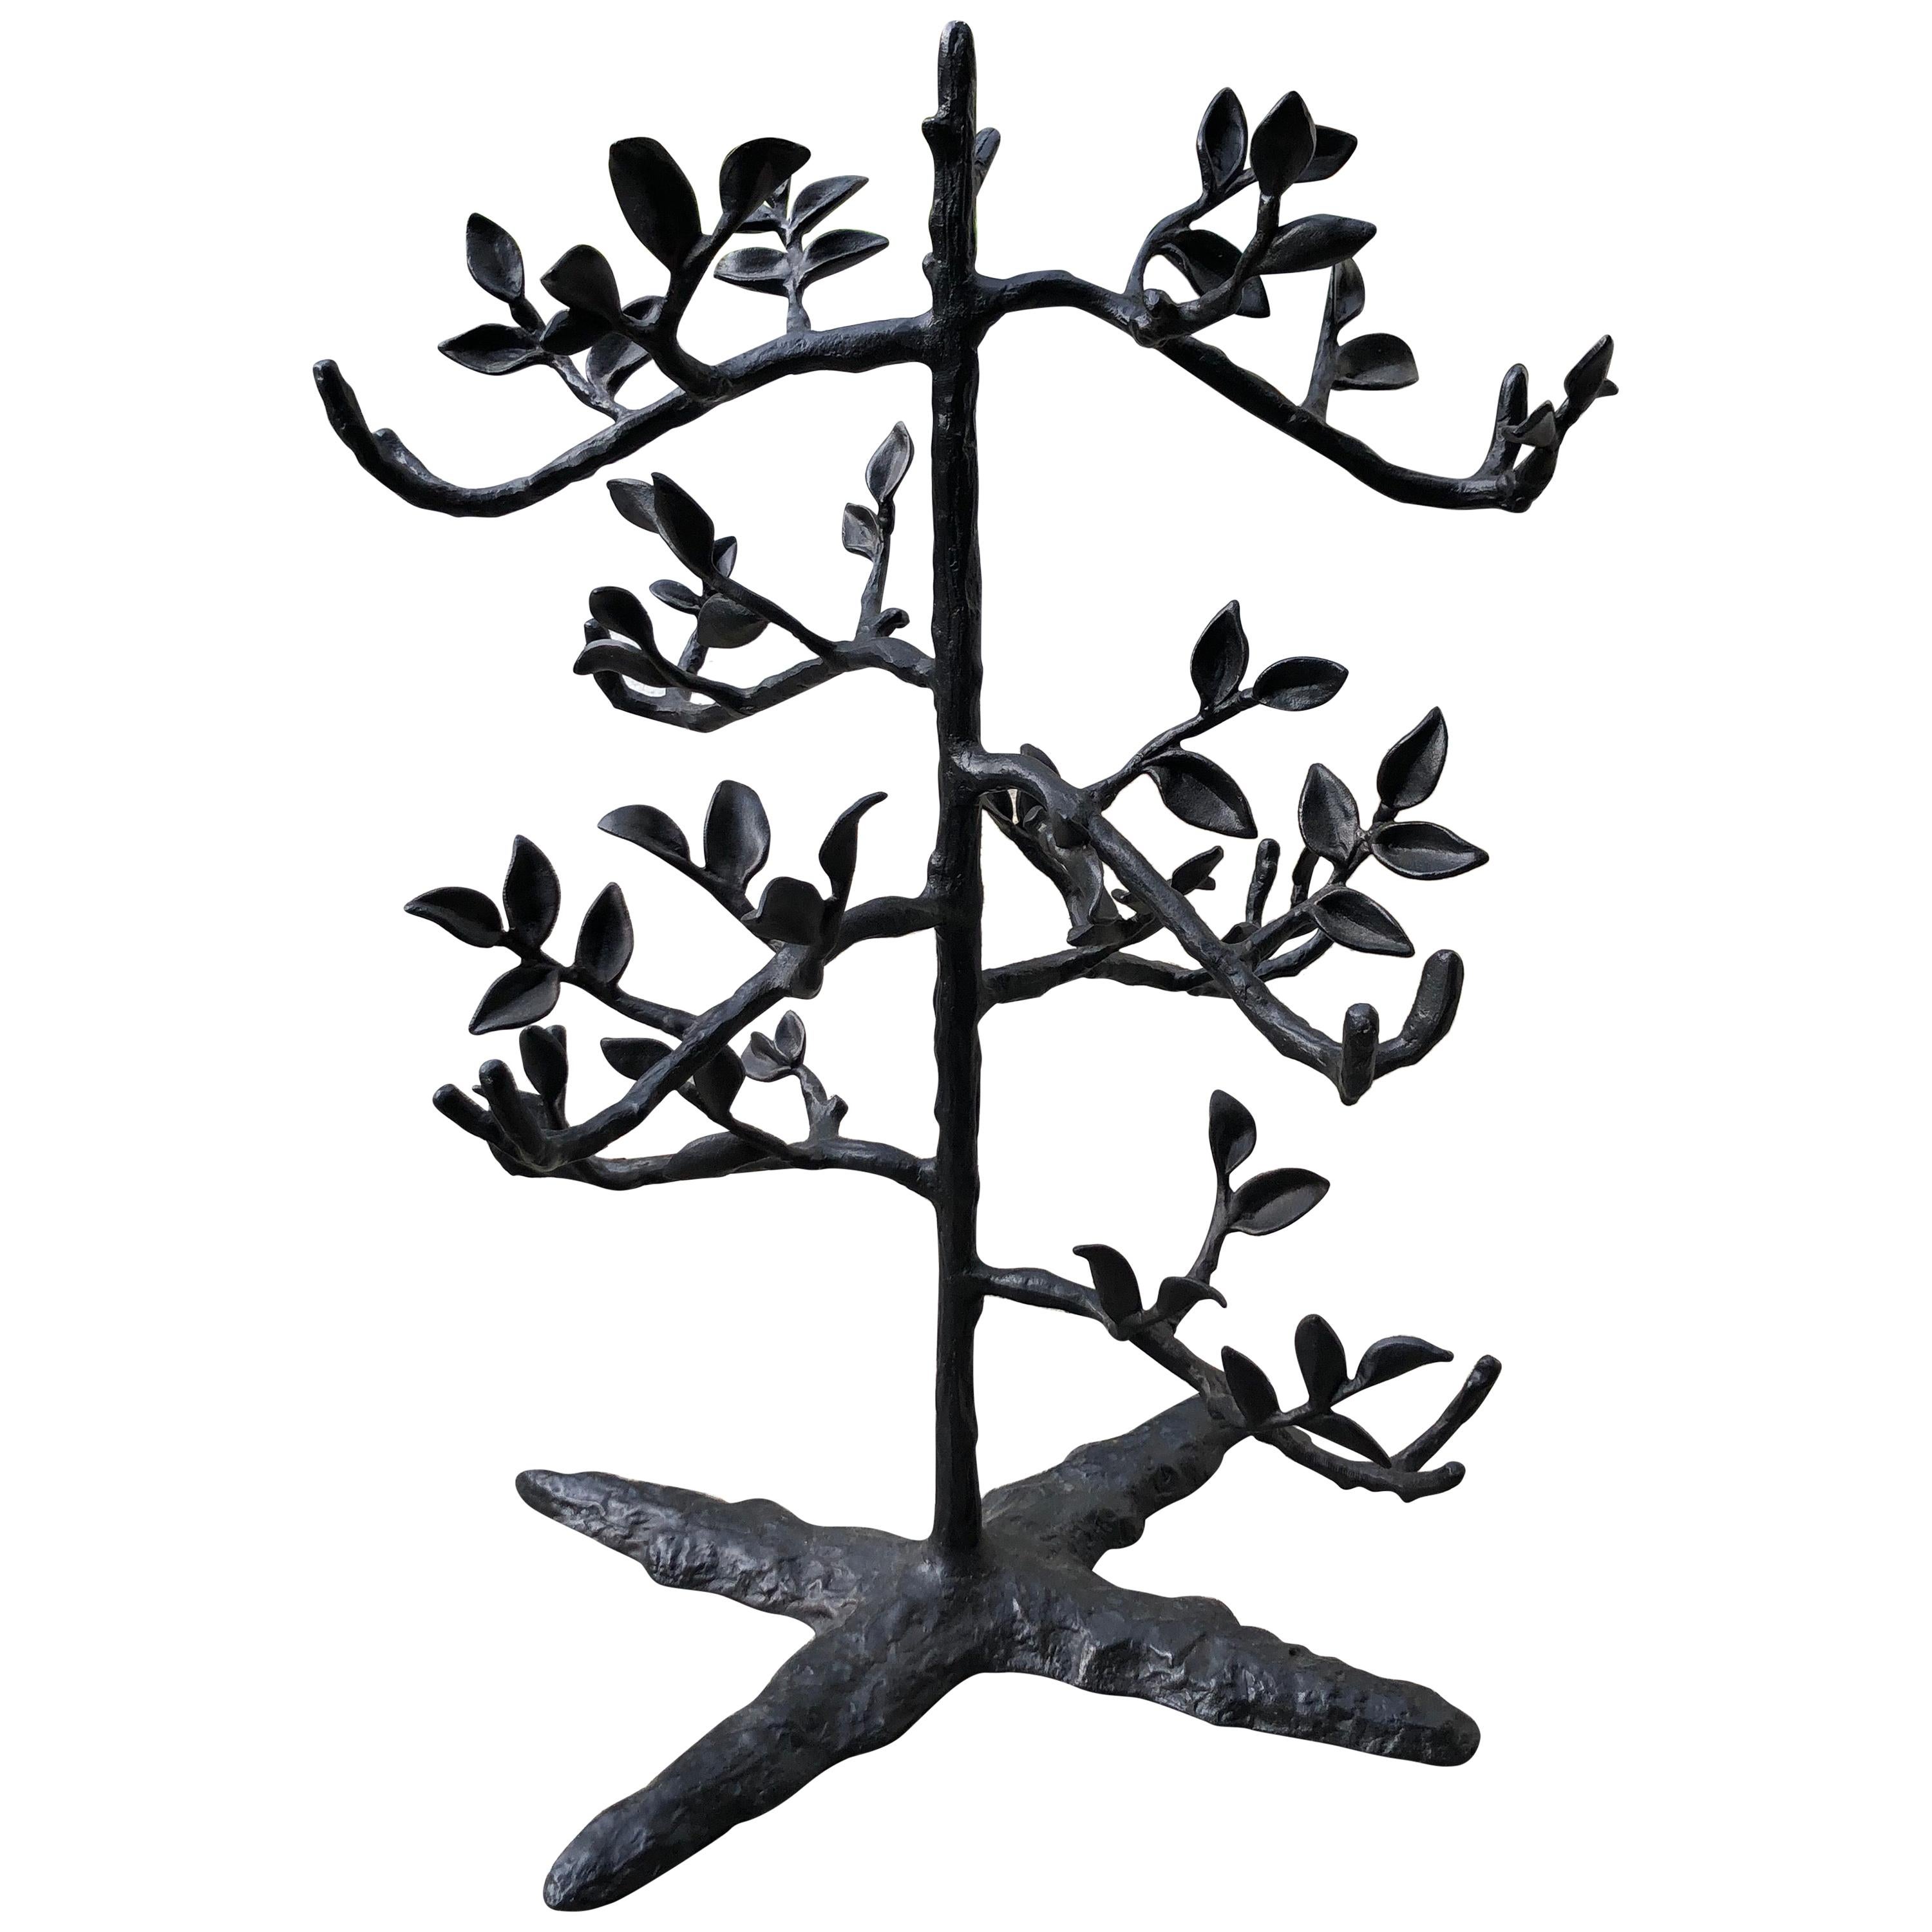 Large table top black metal 6 bottle wine holder in the shape of a tree.